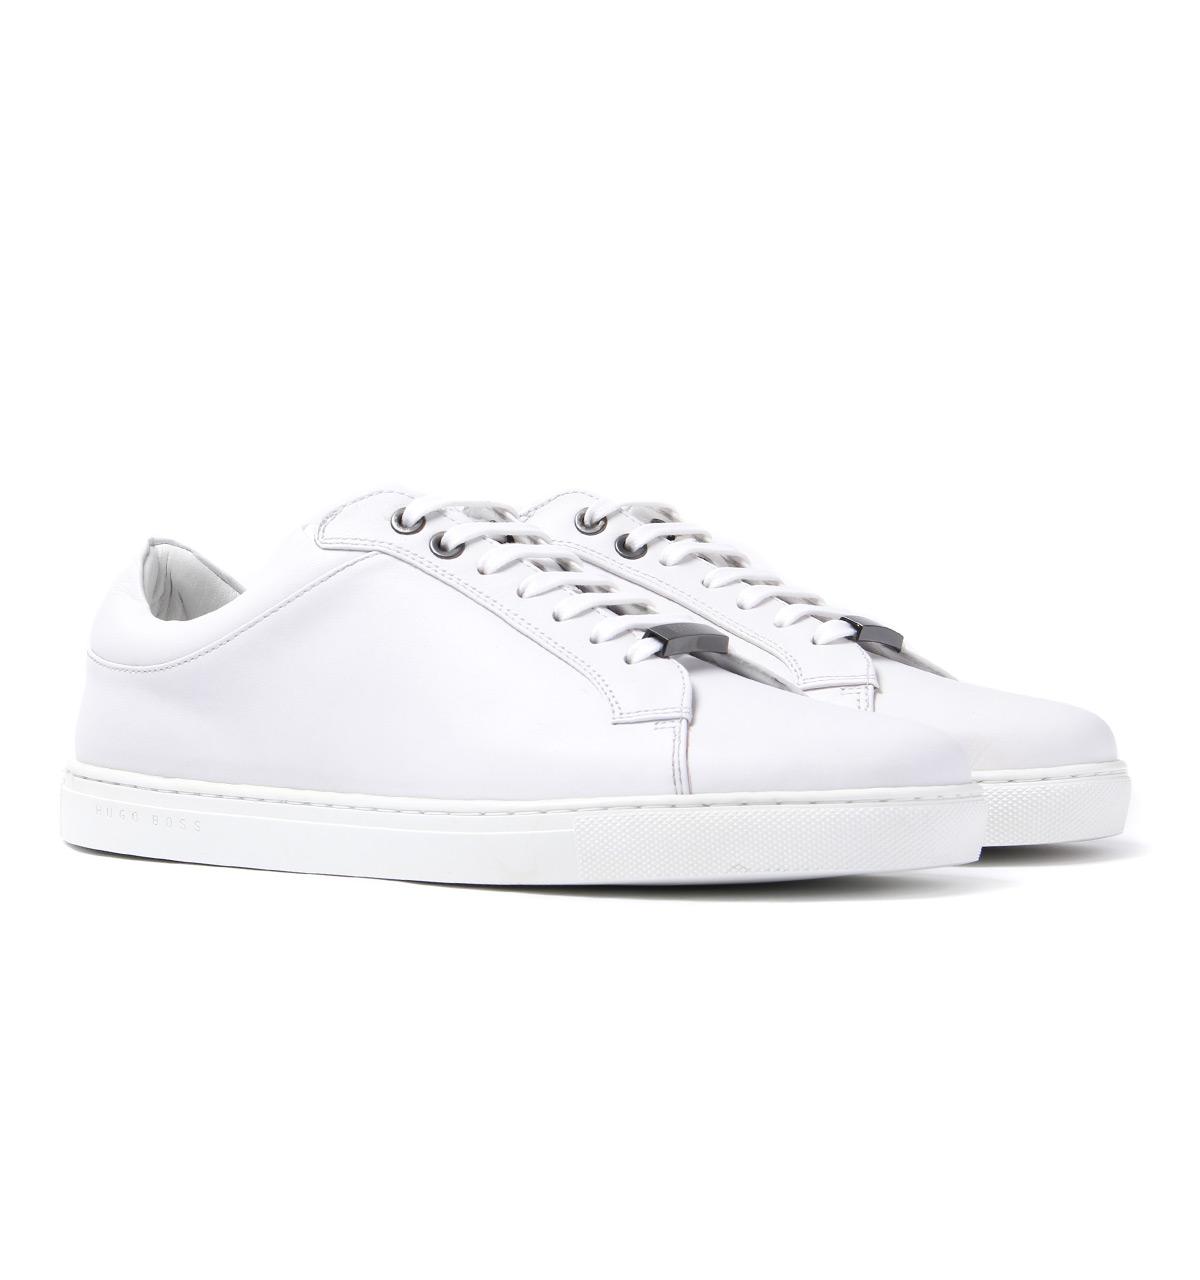 Lyst - Boss White Tribute Tennis Leather Trainers in White for Men